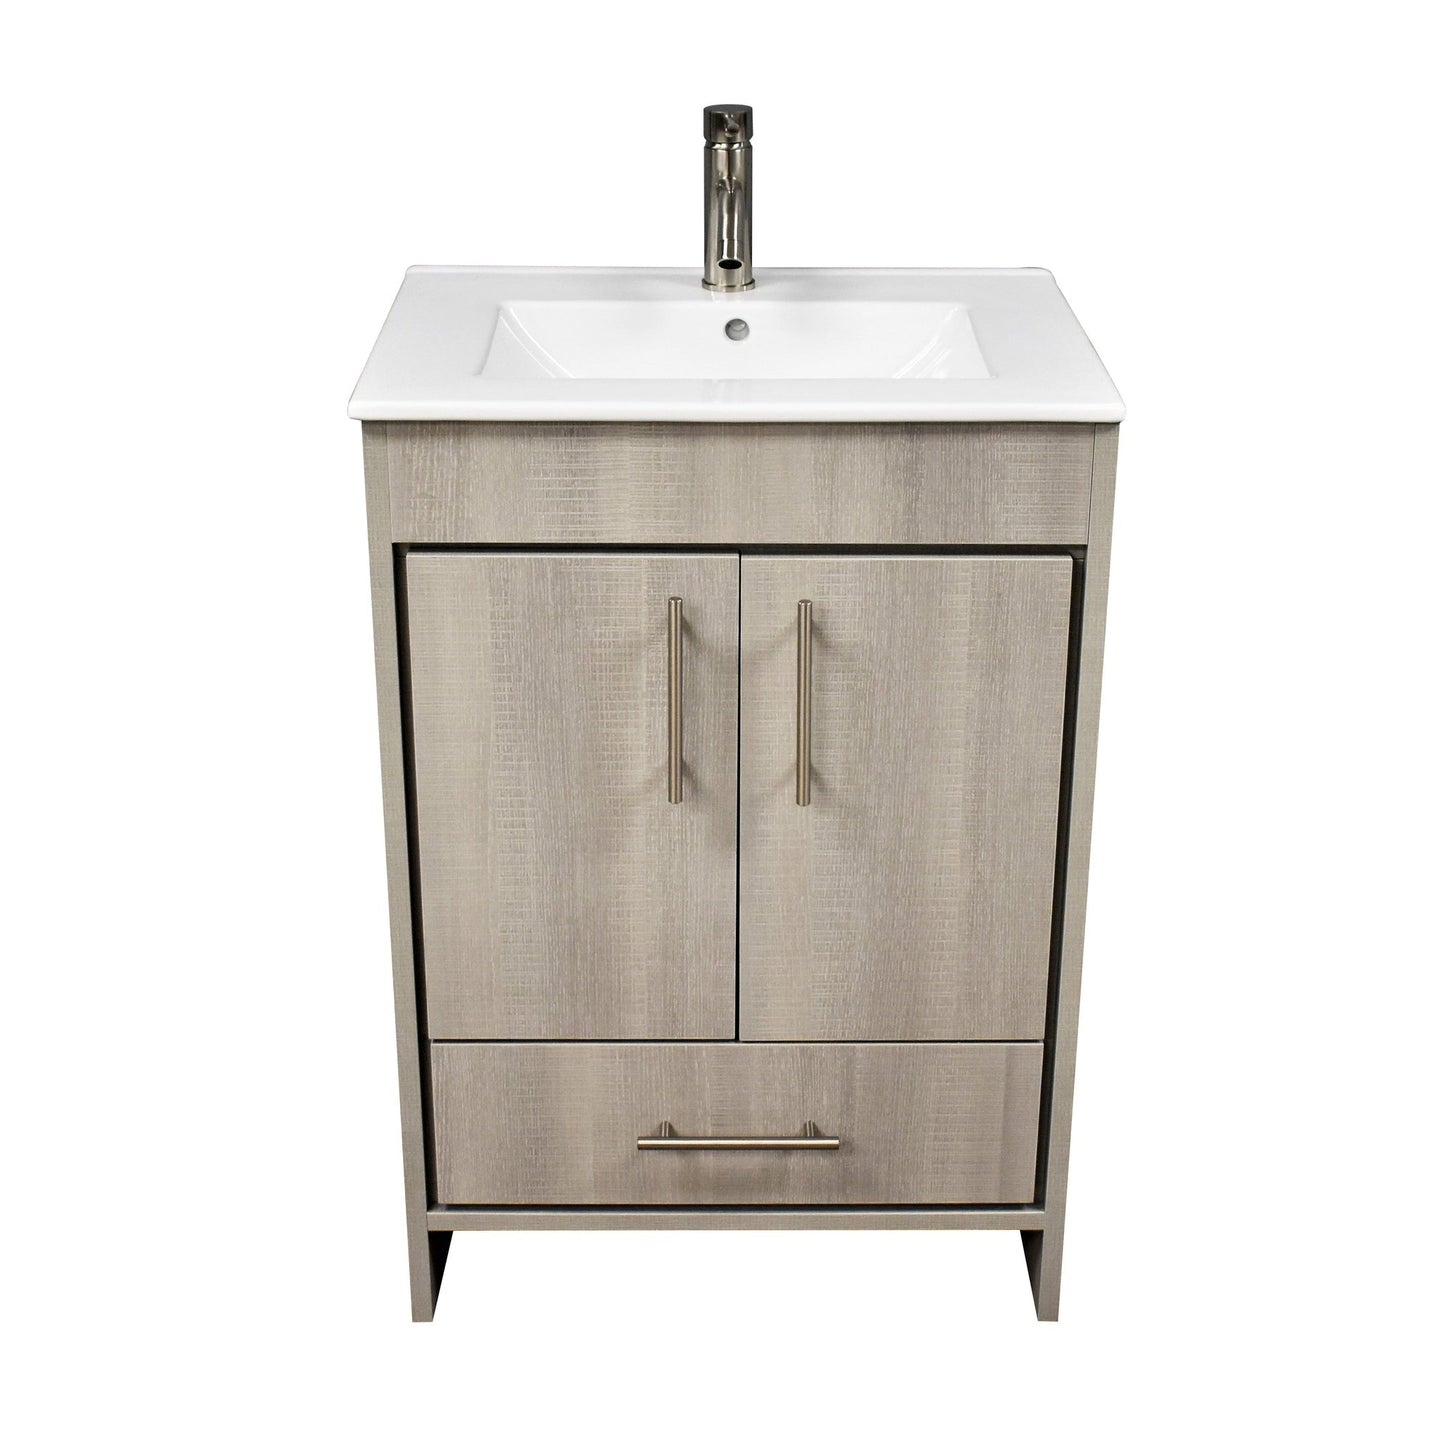 Volpa USA Pacific 30" Weathered Gray Freestanding Modern Bathroom Vanity With Integrated Ceramic Top and Brushed Nickel Round Handles